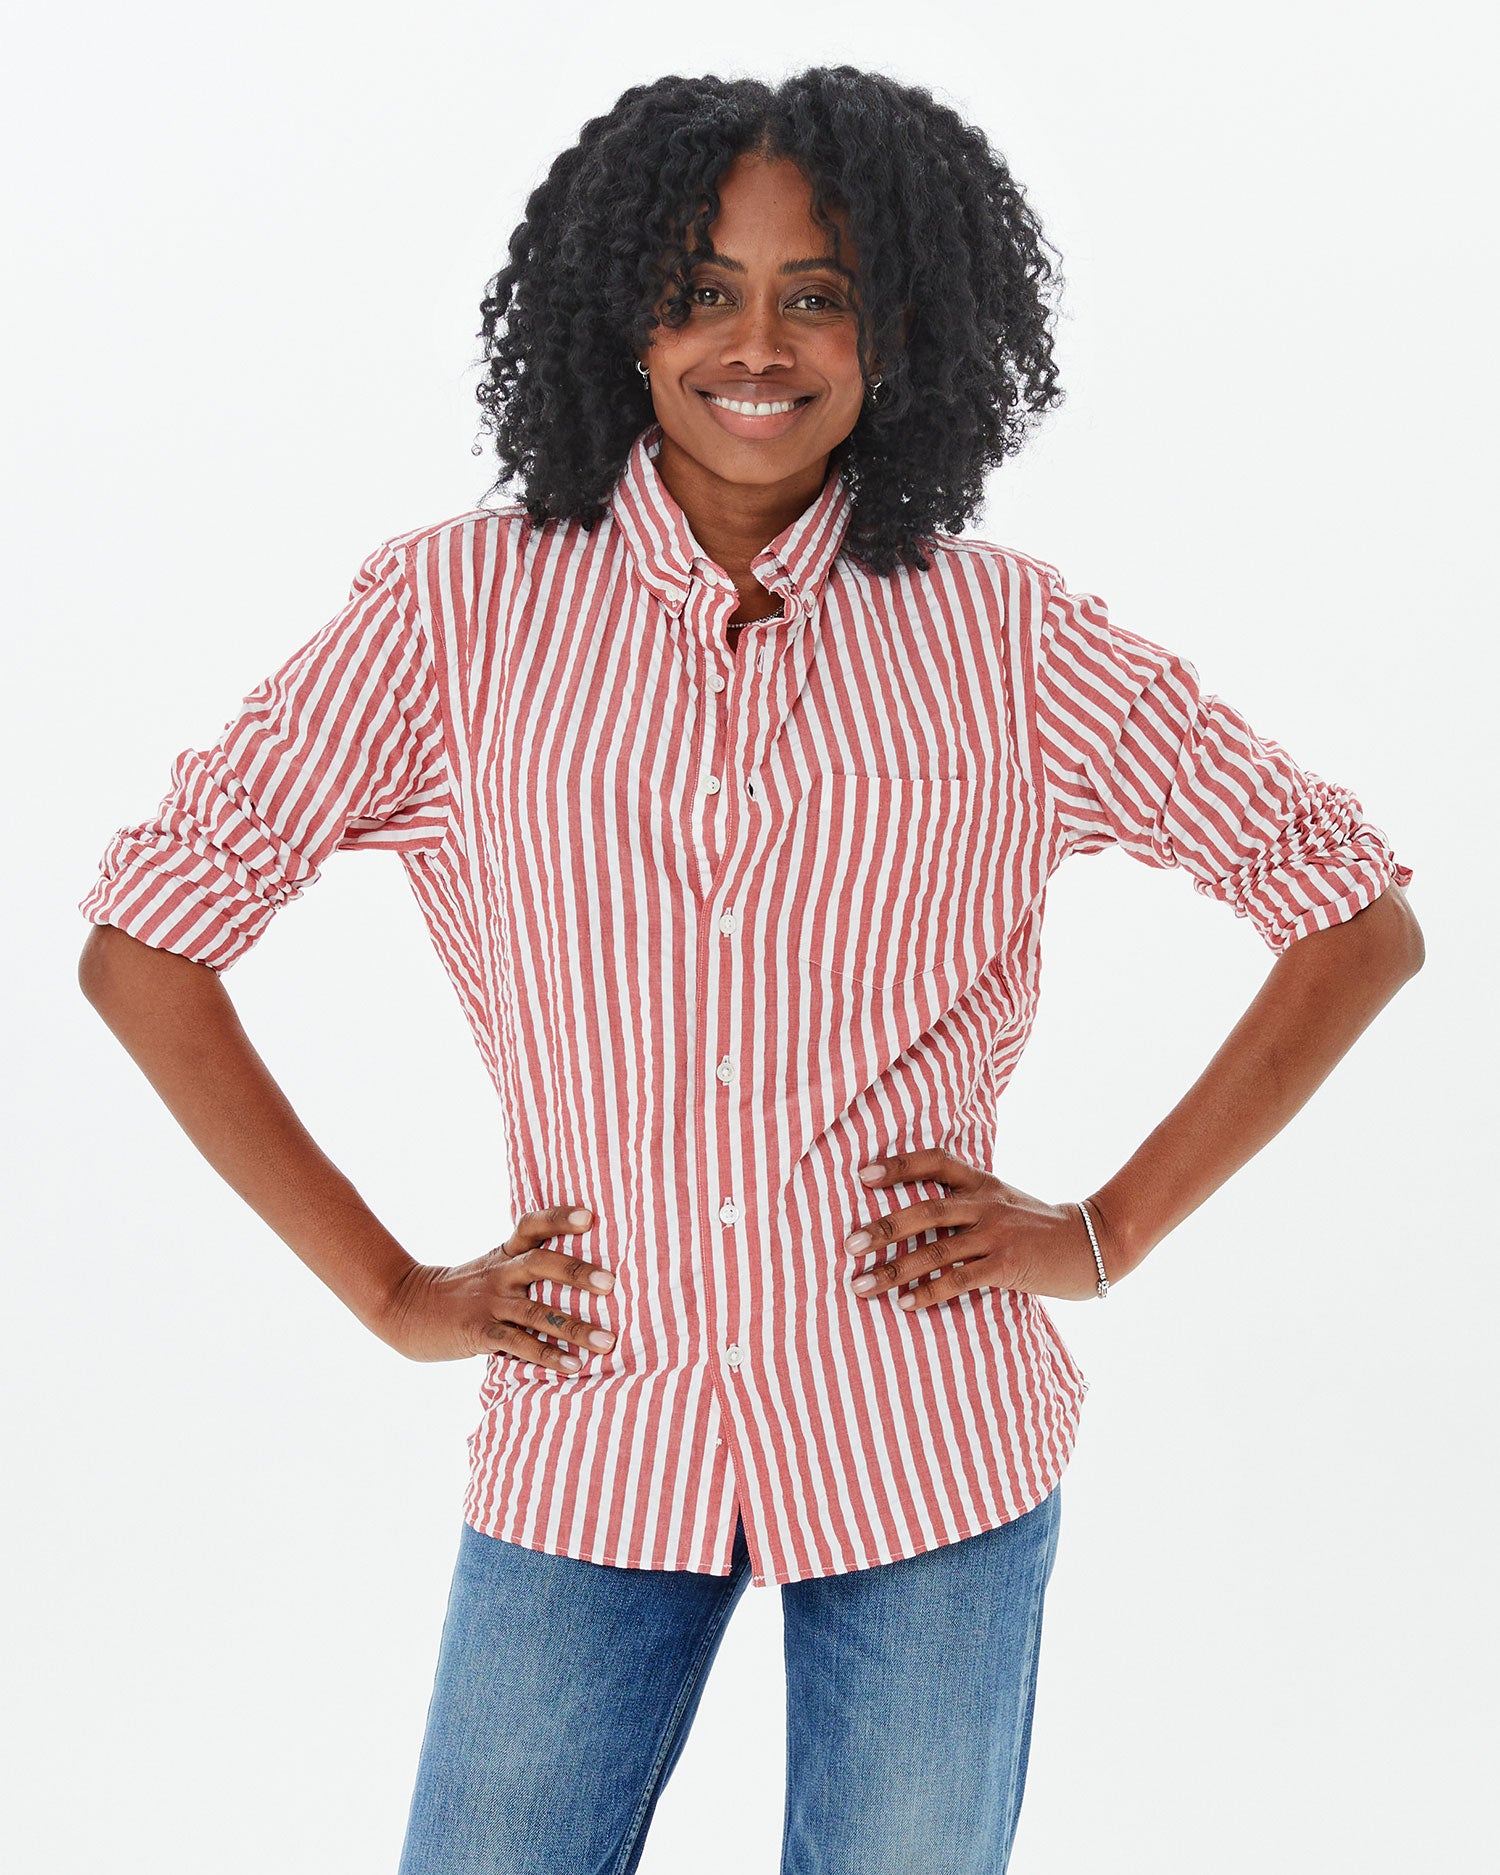 Mecca wearing the Poppy & cream Stripe Single Needle Shirt with jeans. her hands are on her hips